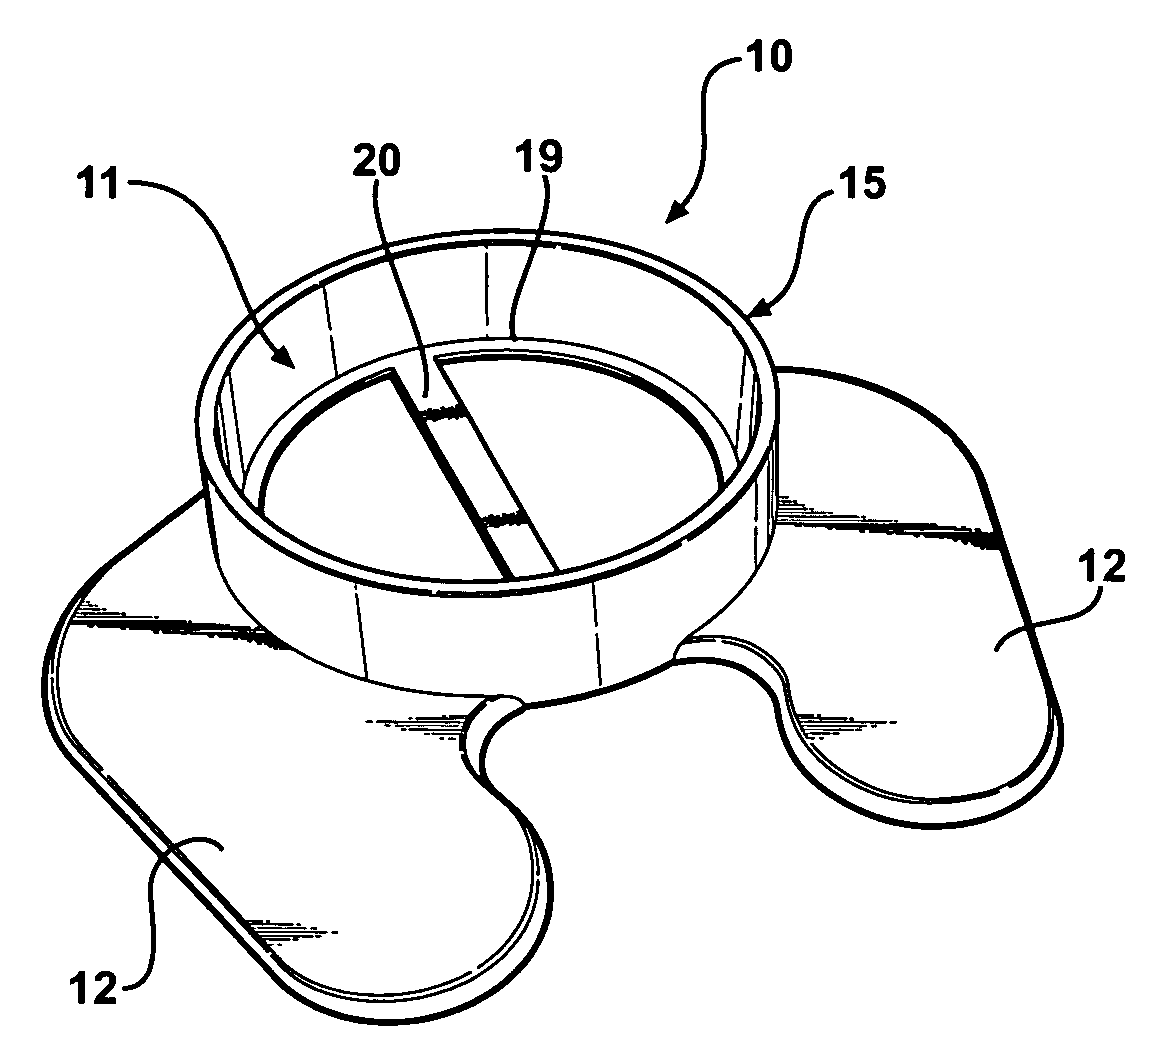 Retainer for immoblizing a bucket during mixing